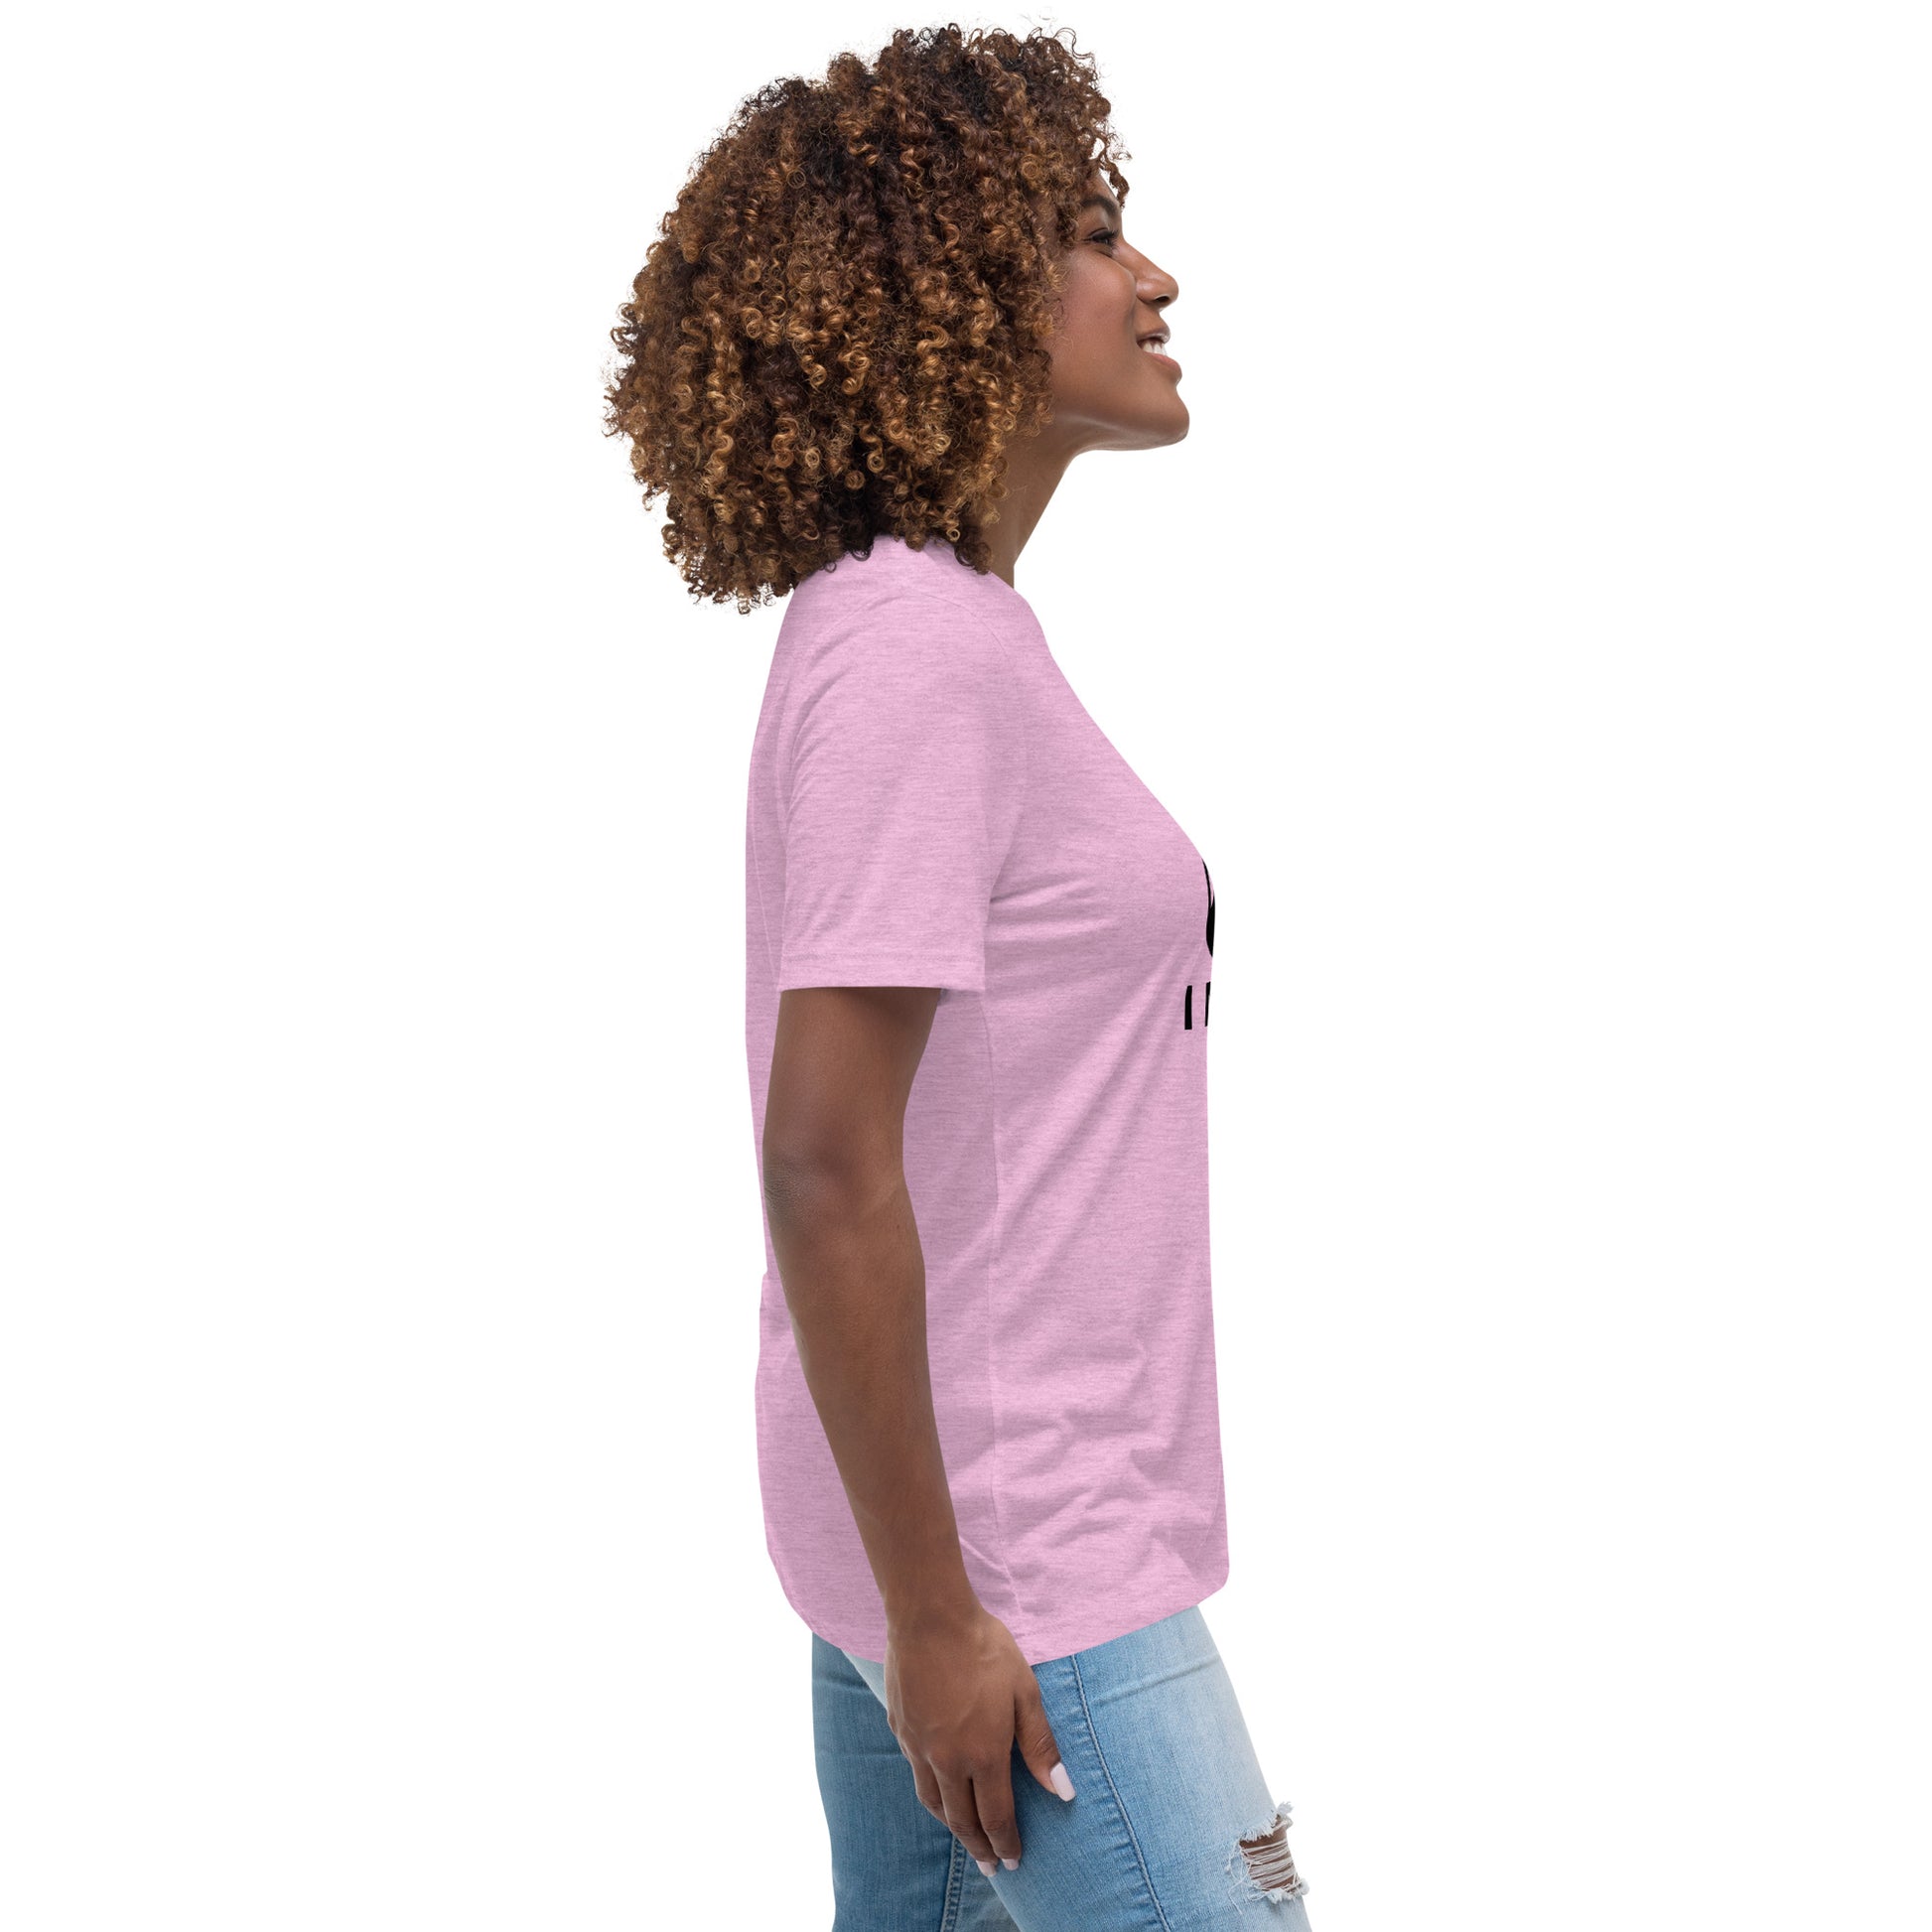 Woman with lilac t-shirt with picture of "F1" key and text "I need help"